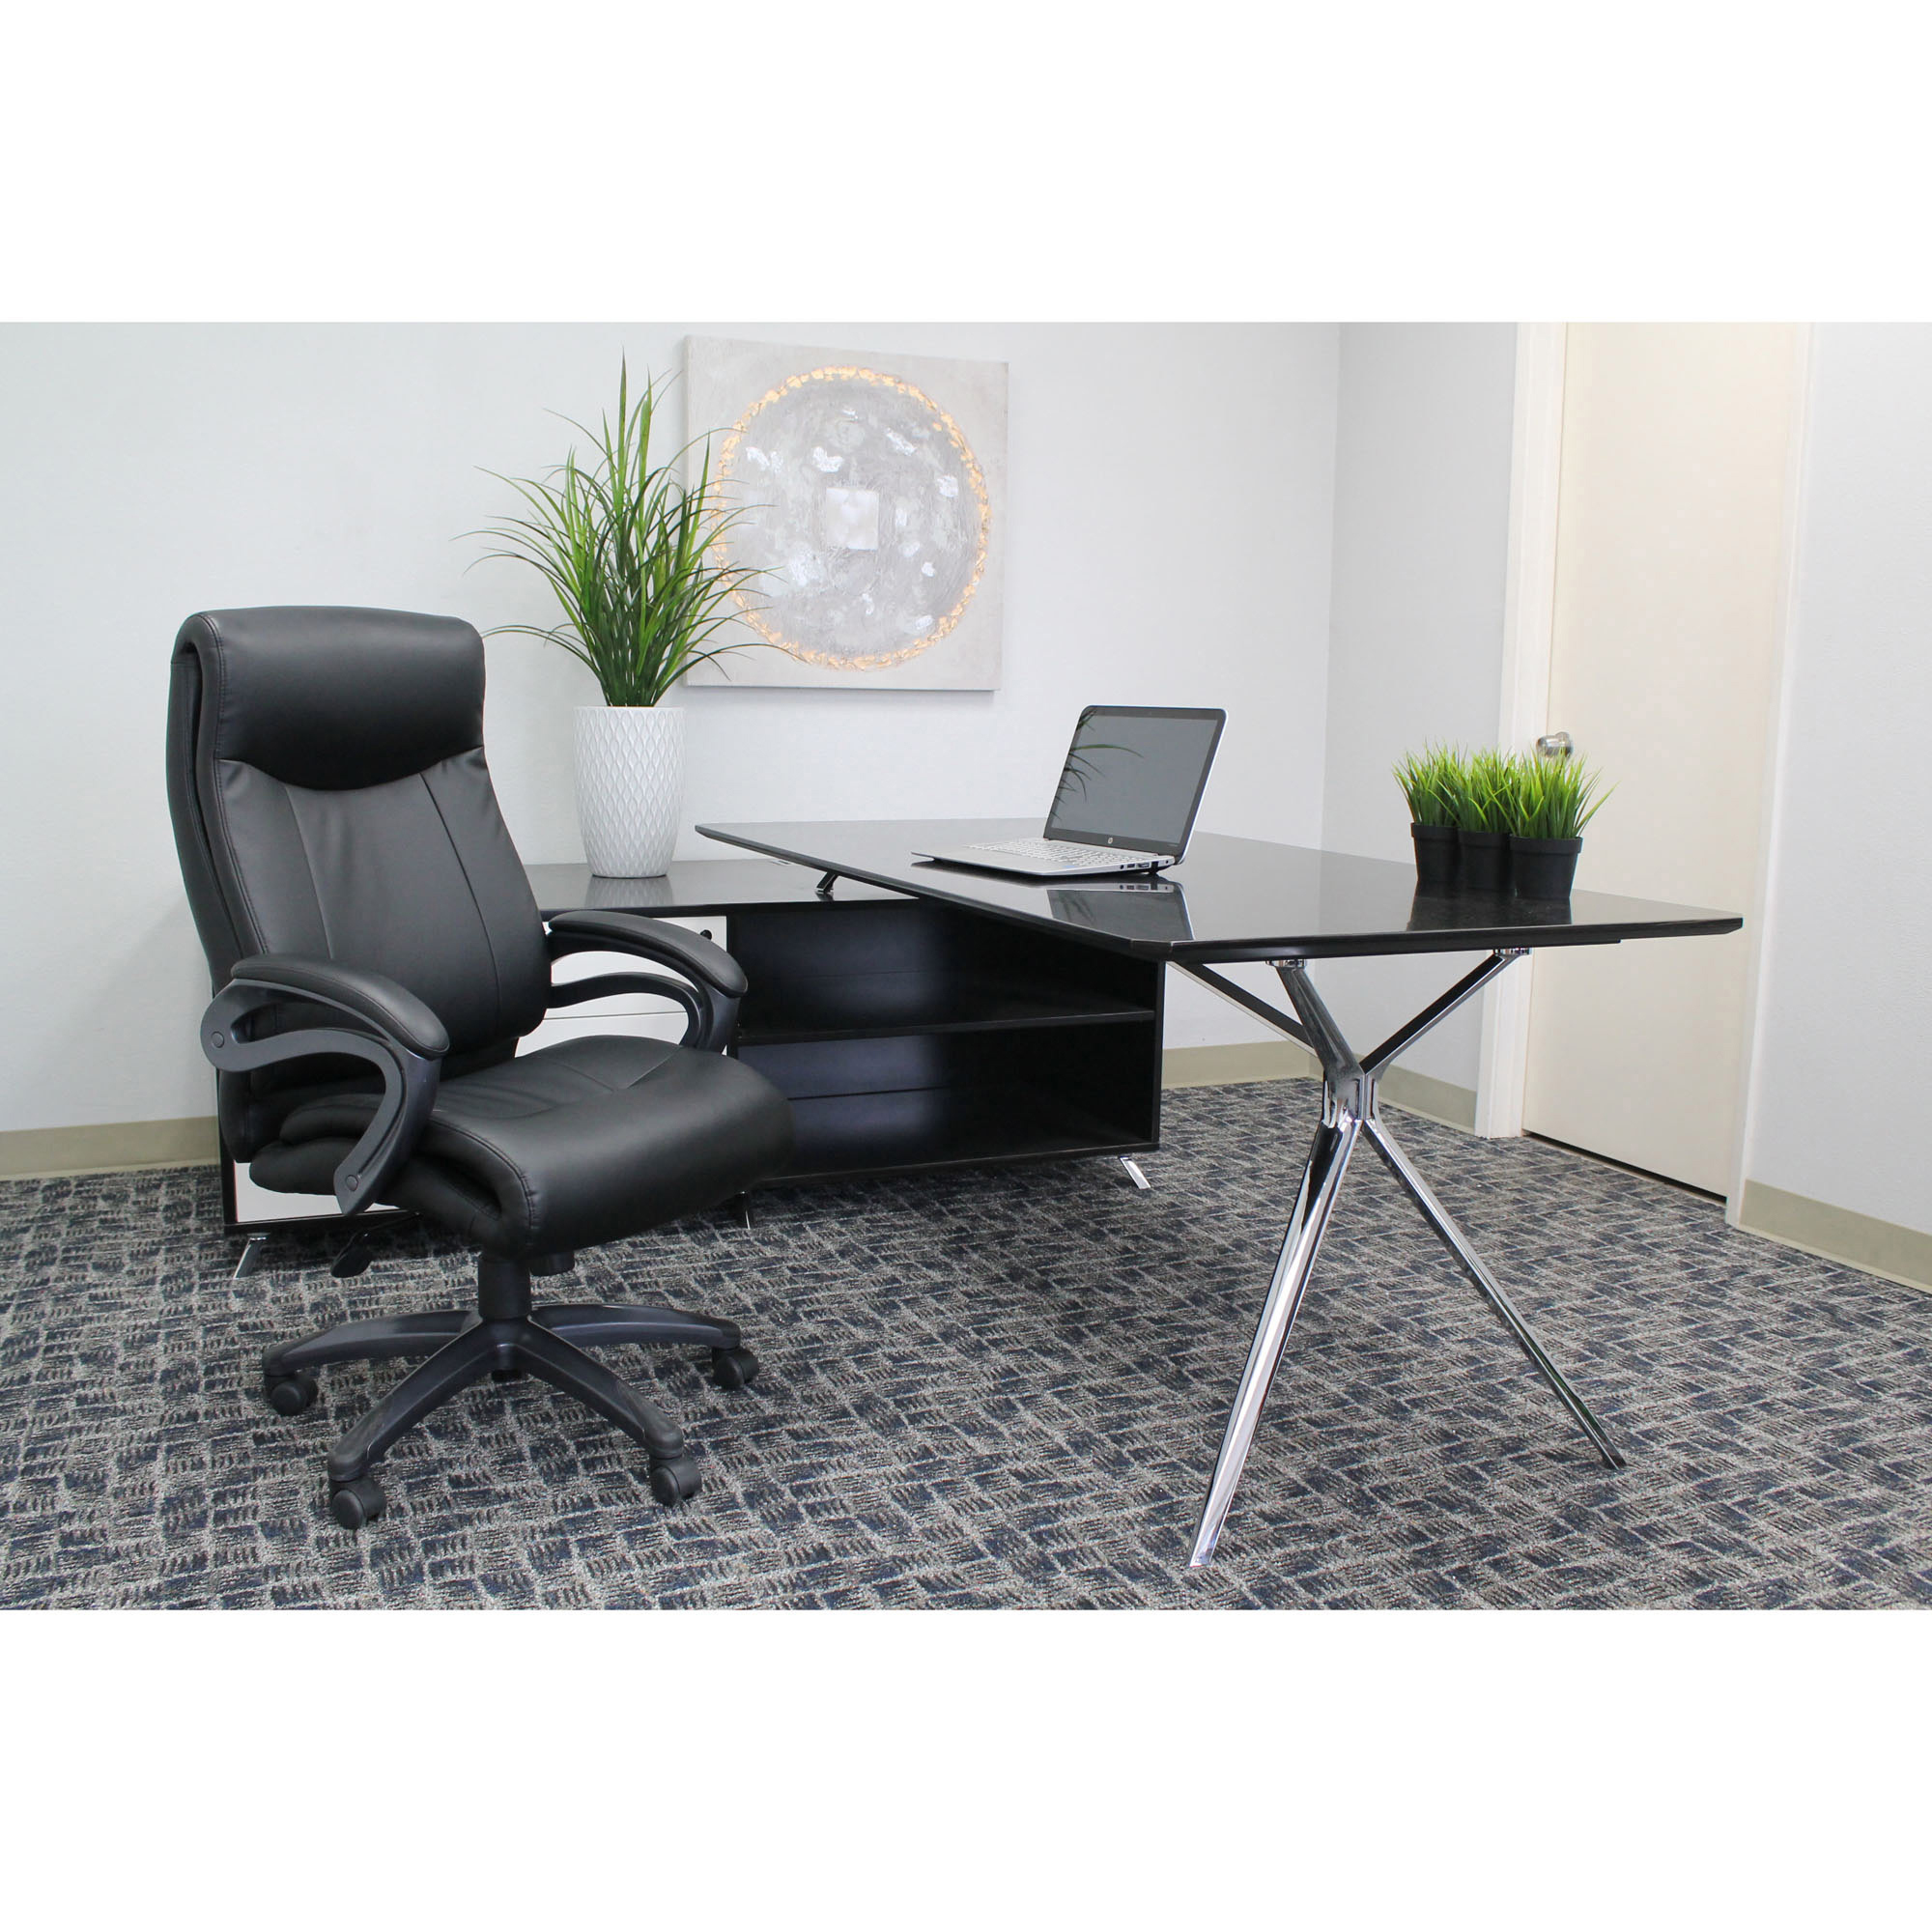 Executive Mid Back Office Chair - Black by Boss Office Products